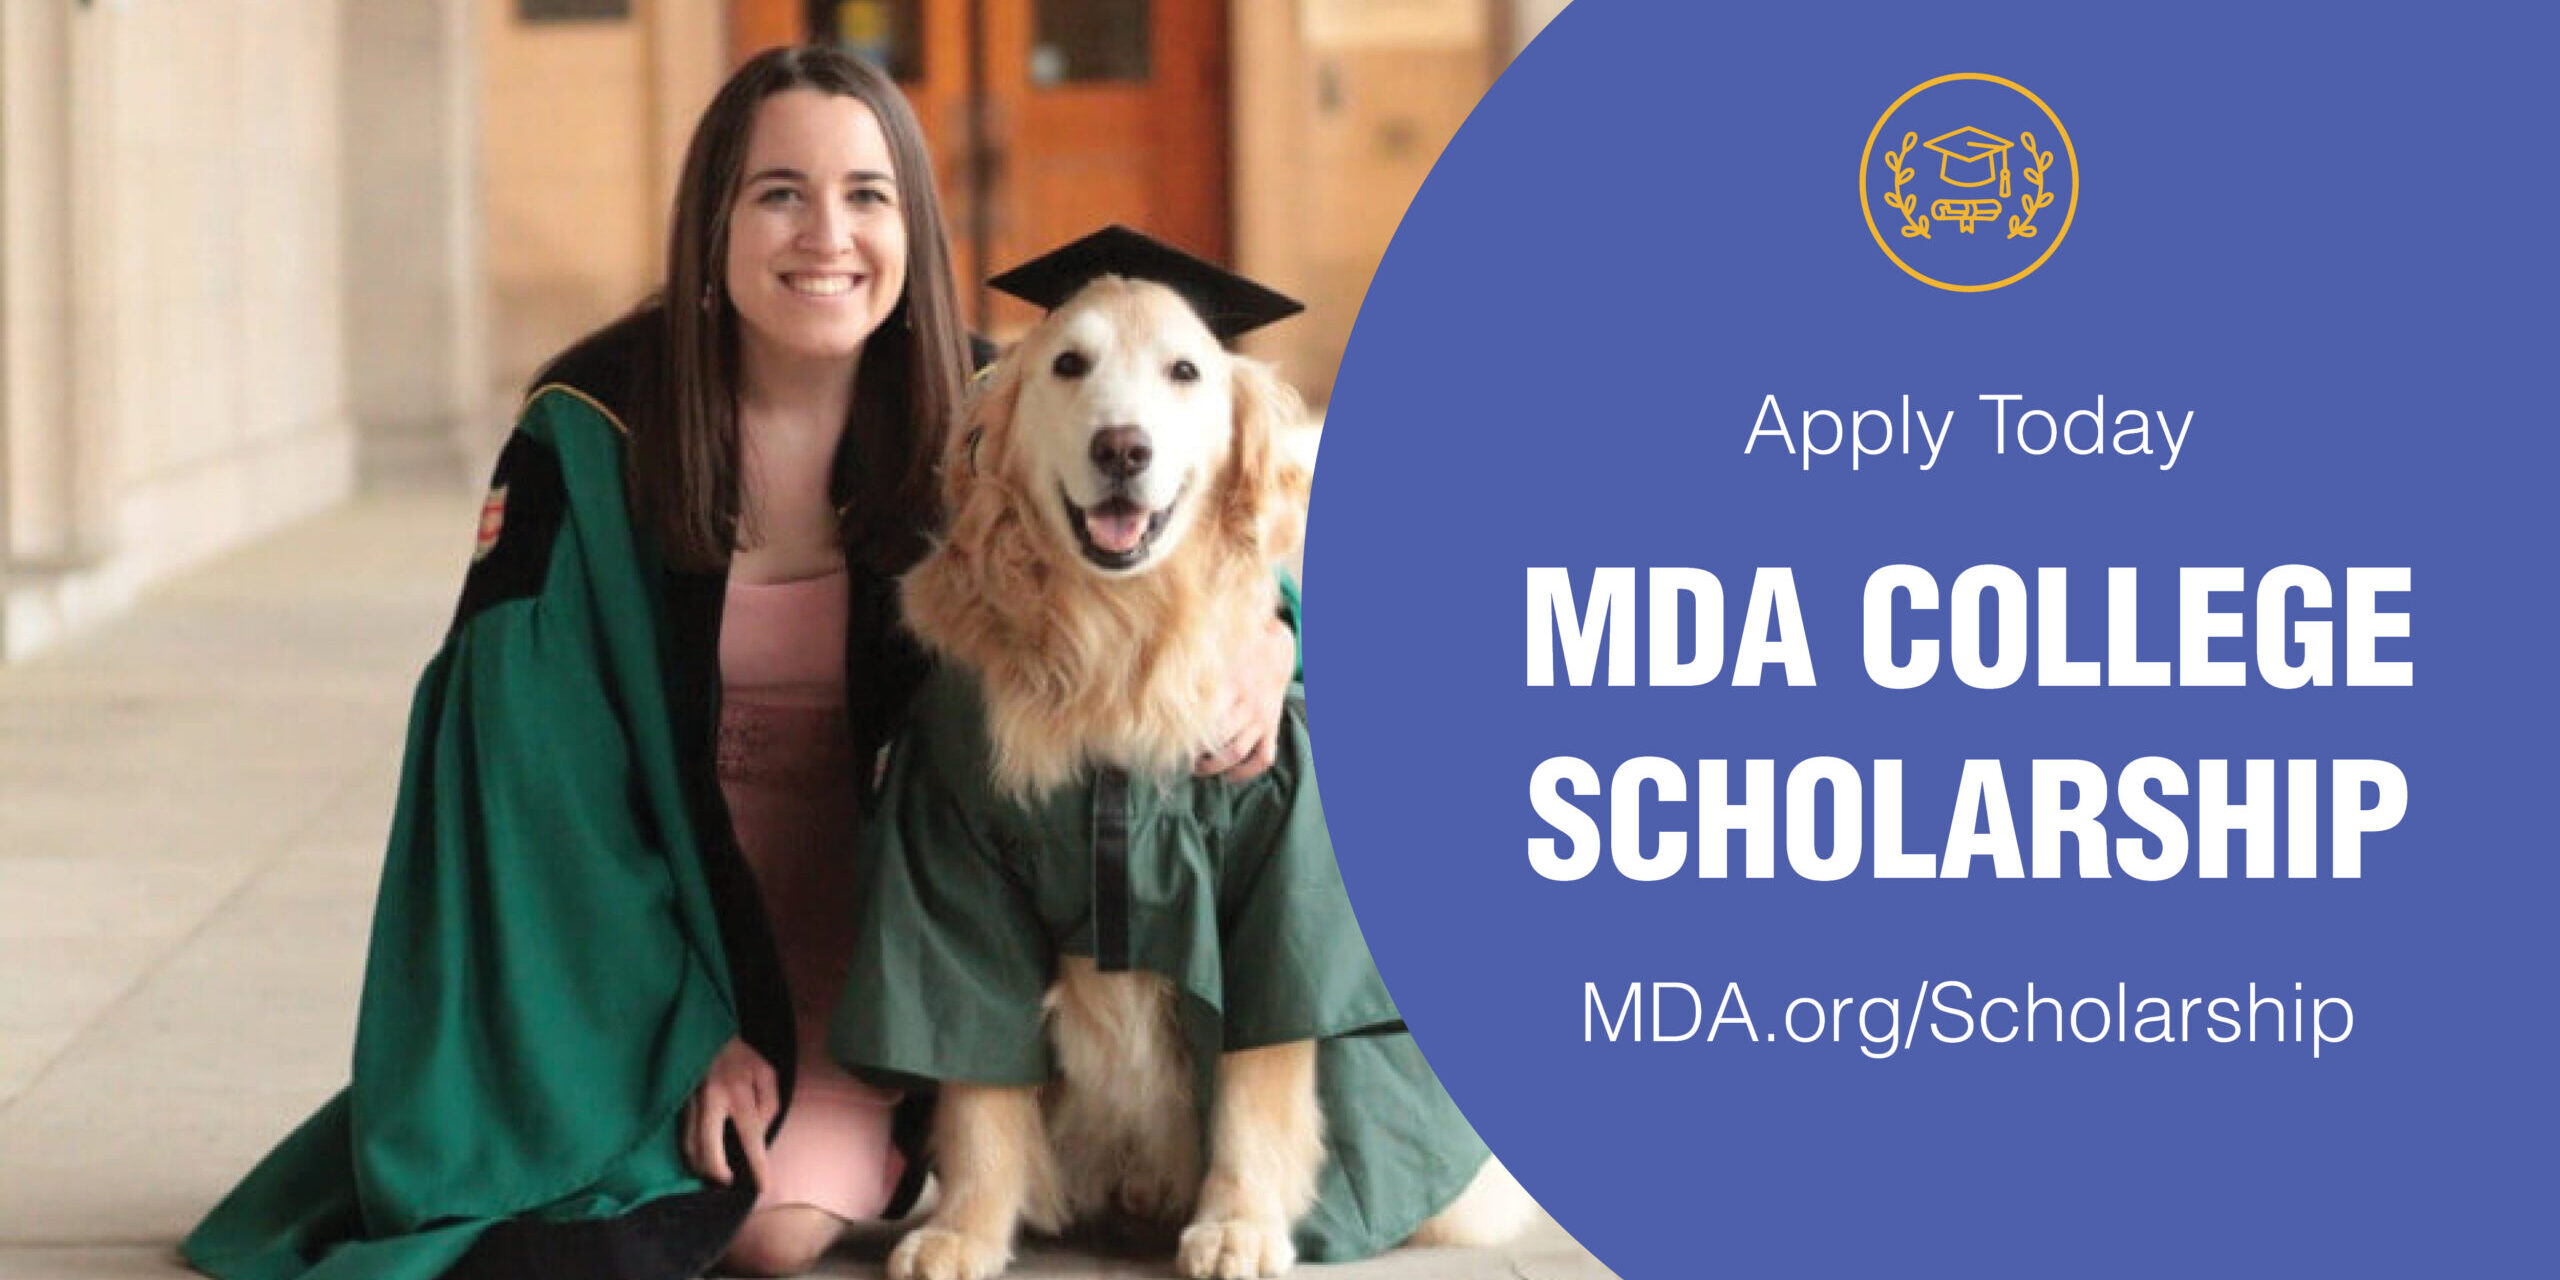 Photograph of a girl in a graduation gown kneeling next to a golden retriever in a cap and gown, round blue graphic next to image that says "Apply Today, MDA COLLEGE SCHOLARSHIP" and lists website